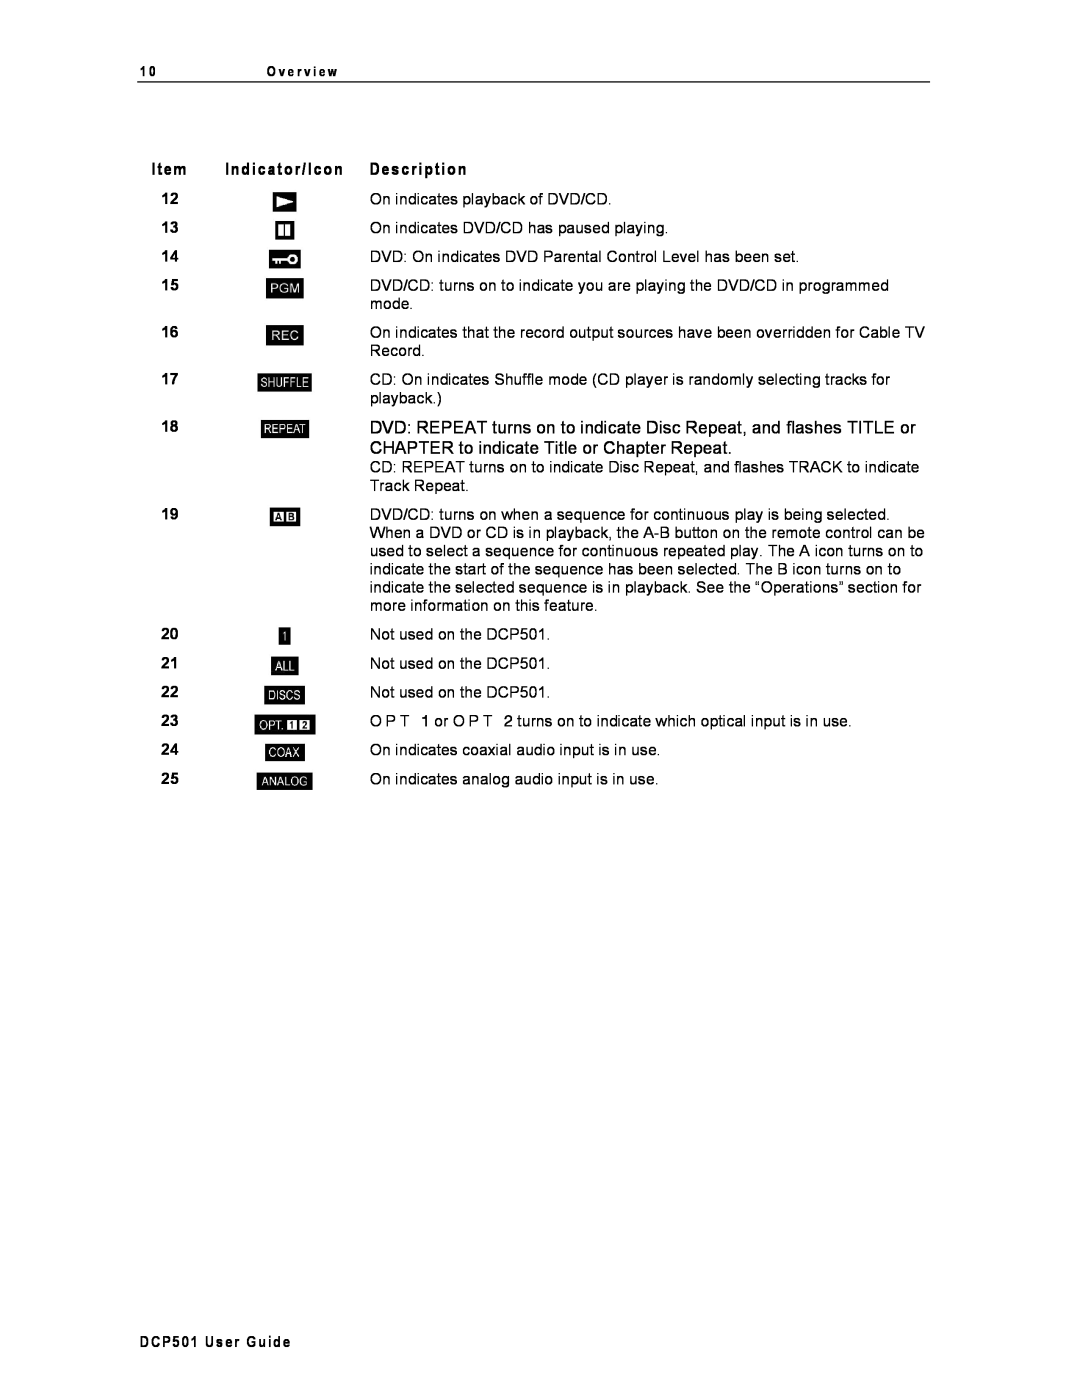 Motorola DCP501 manual Indicator/Icon Description, CHAPTER to indicate Title or Chapter Repeat 